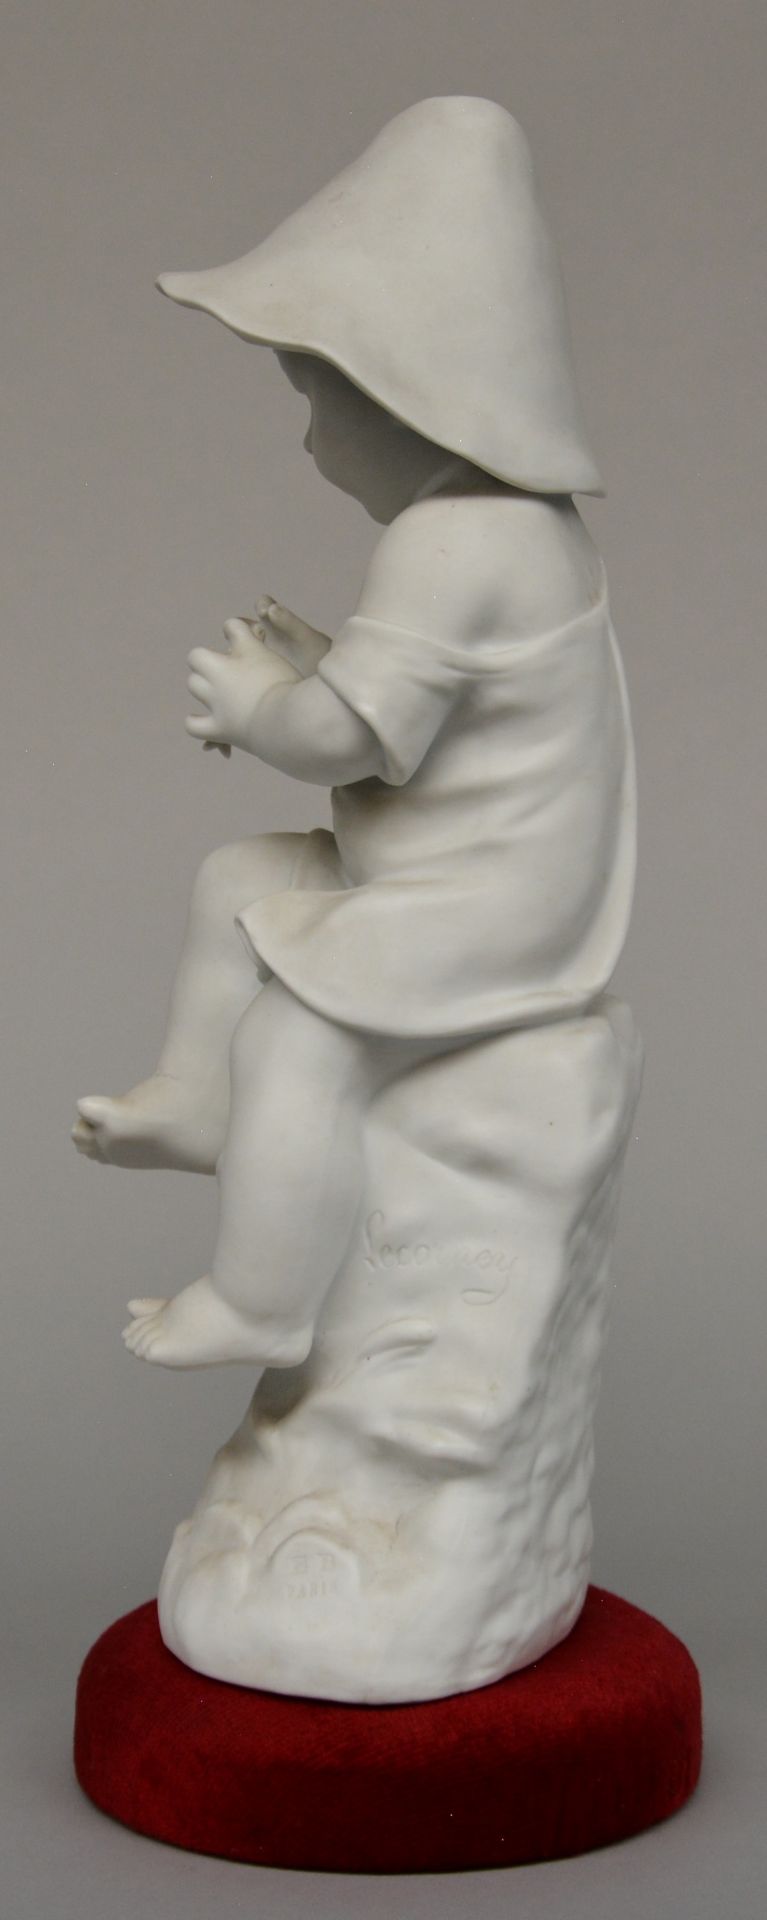 Leconney, a biscuit figure of a young child, H 39,5 cm - Image 2 of 6